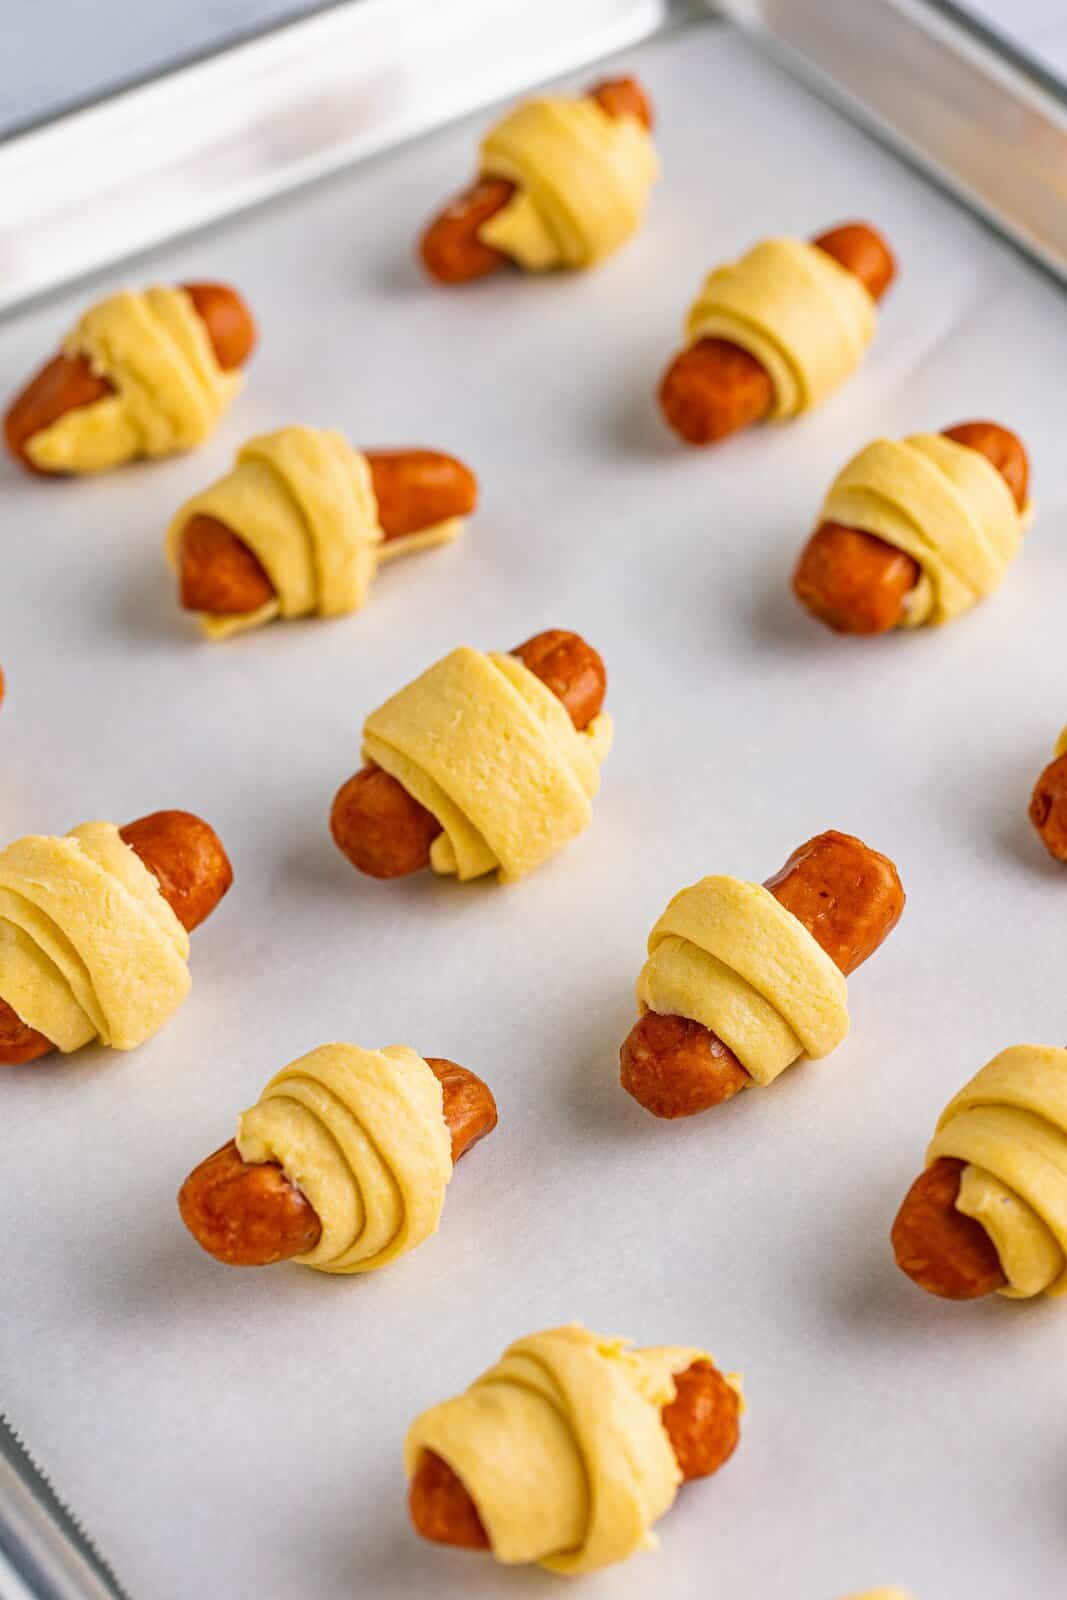 Lil smokies wrapped in crescent rolls on parchment lined baking sheet.